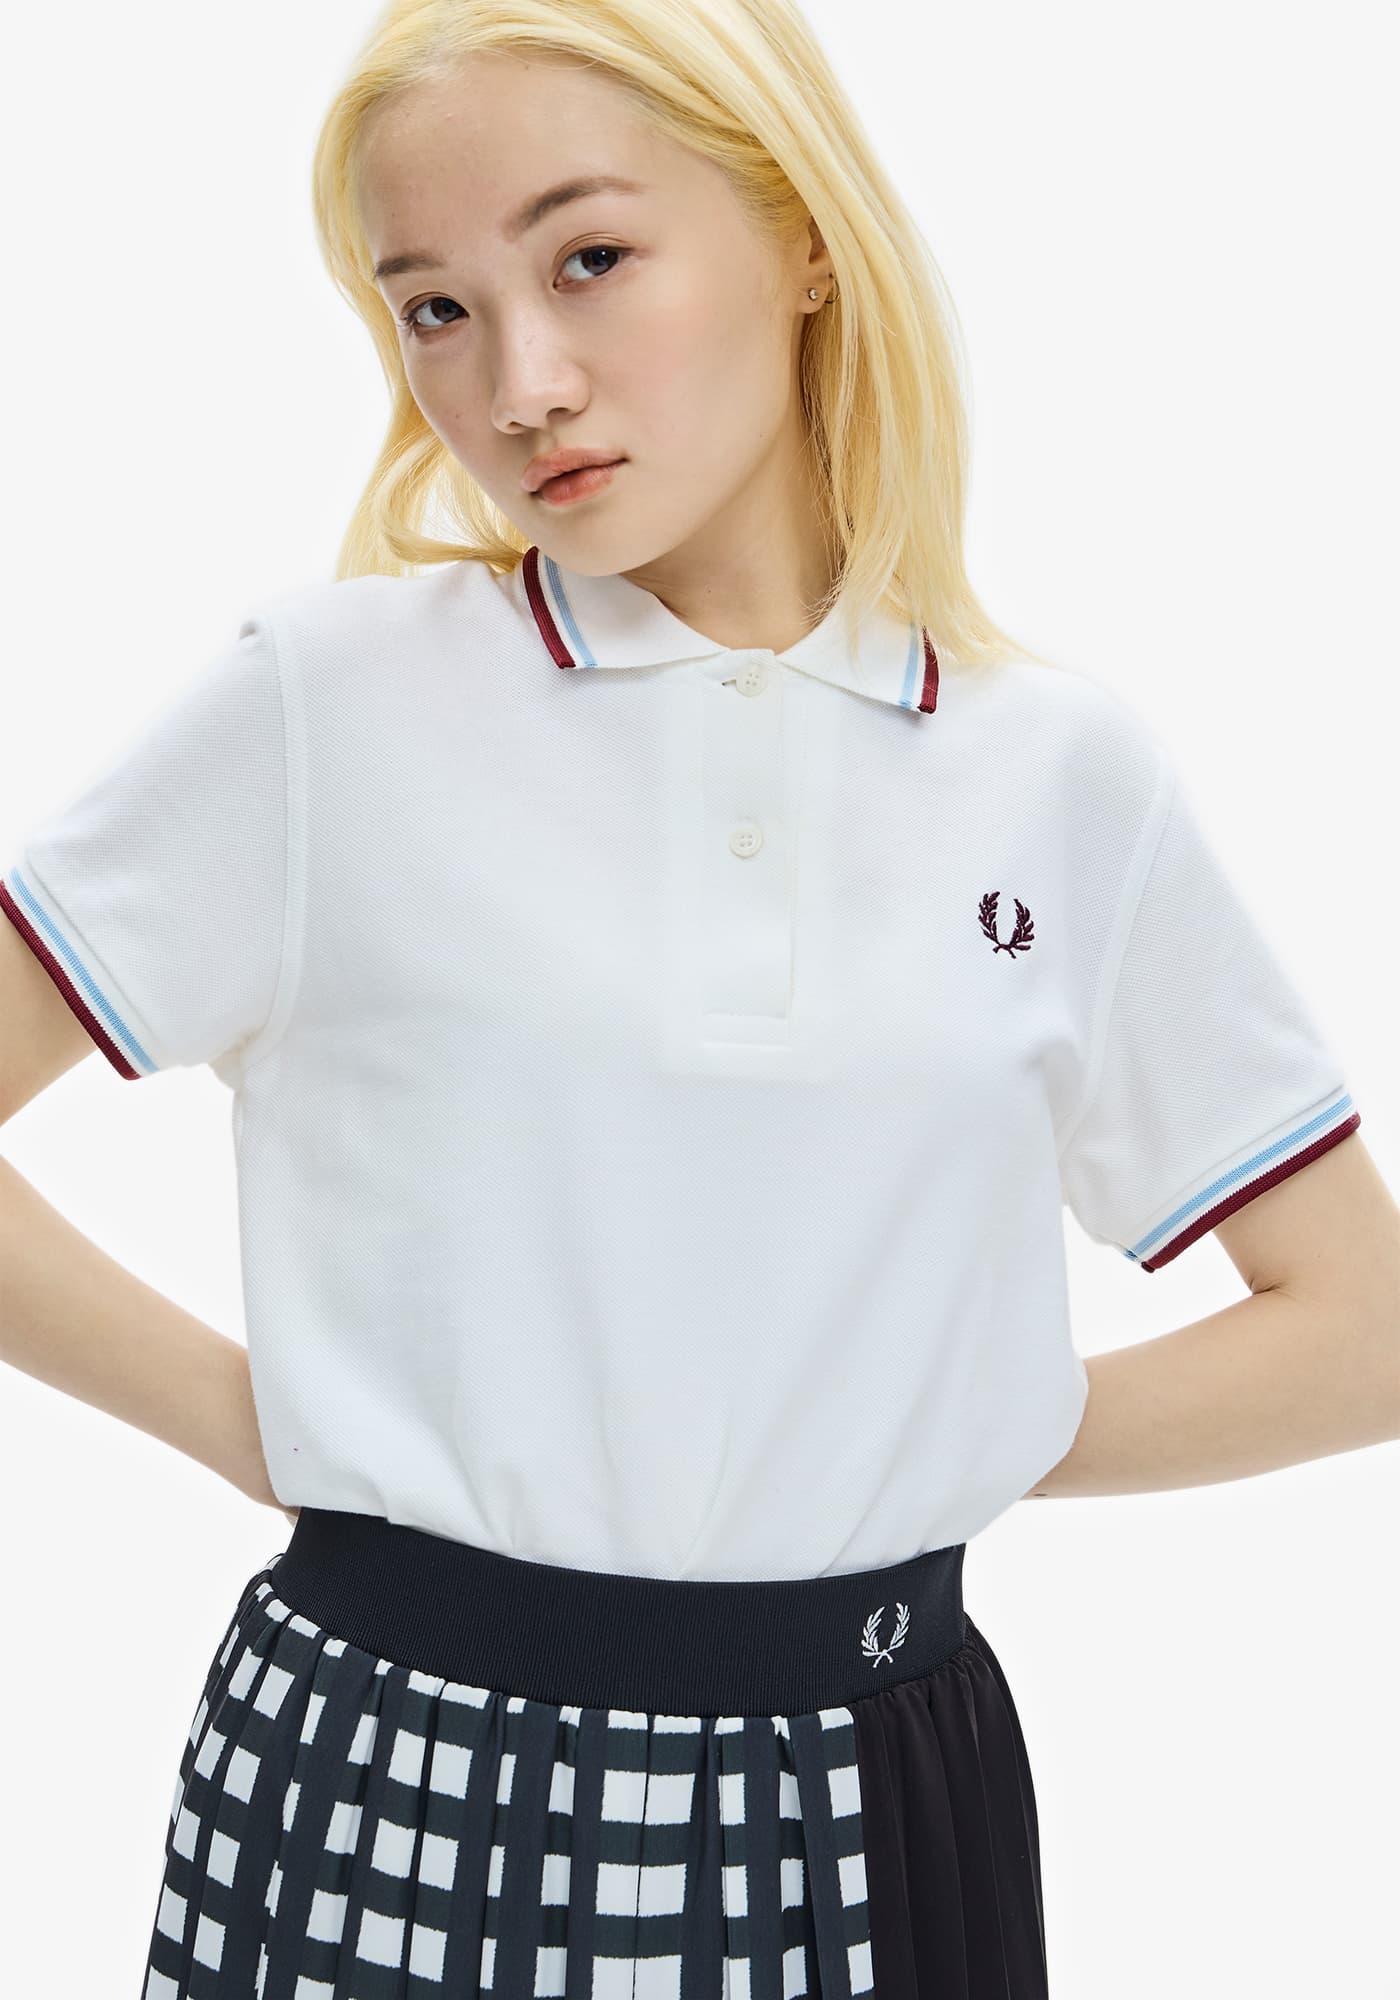 The Fred Perry Shirt - G12|FRED PERRY(フレッドペリー)の通販